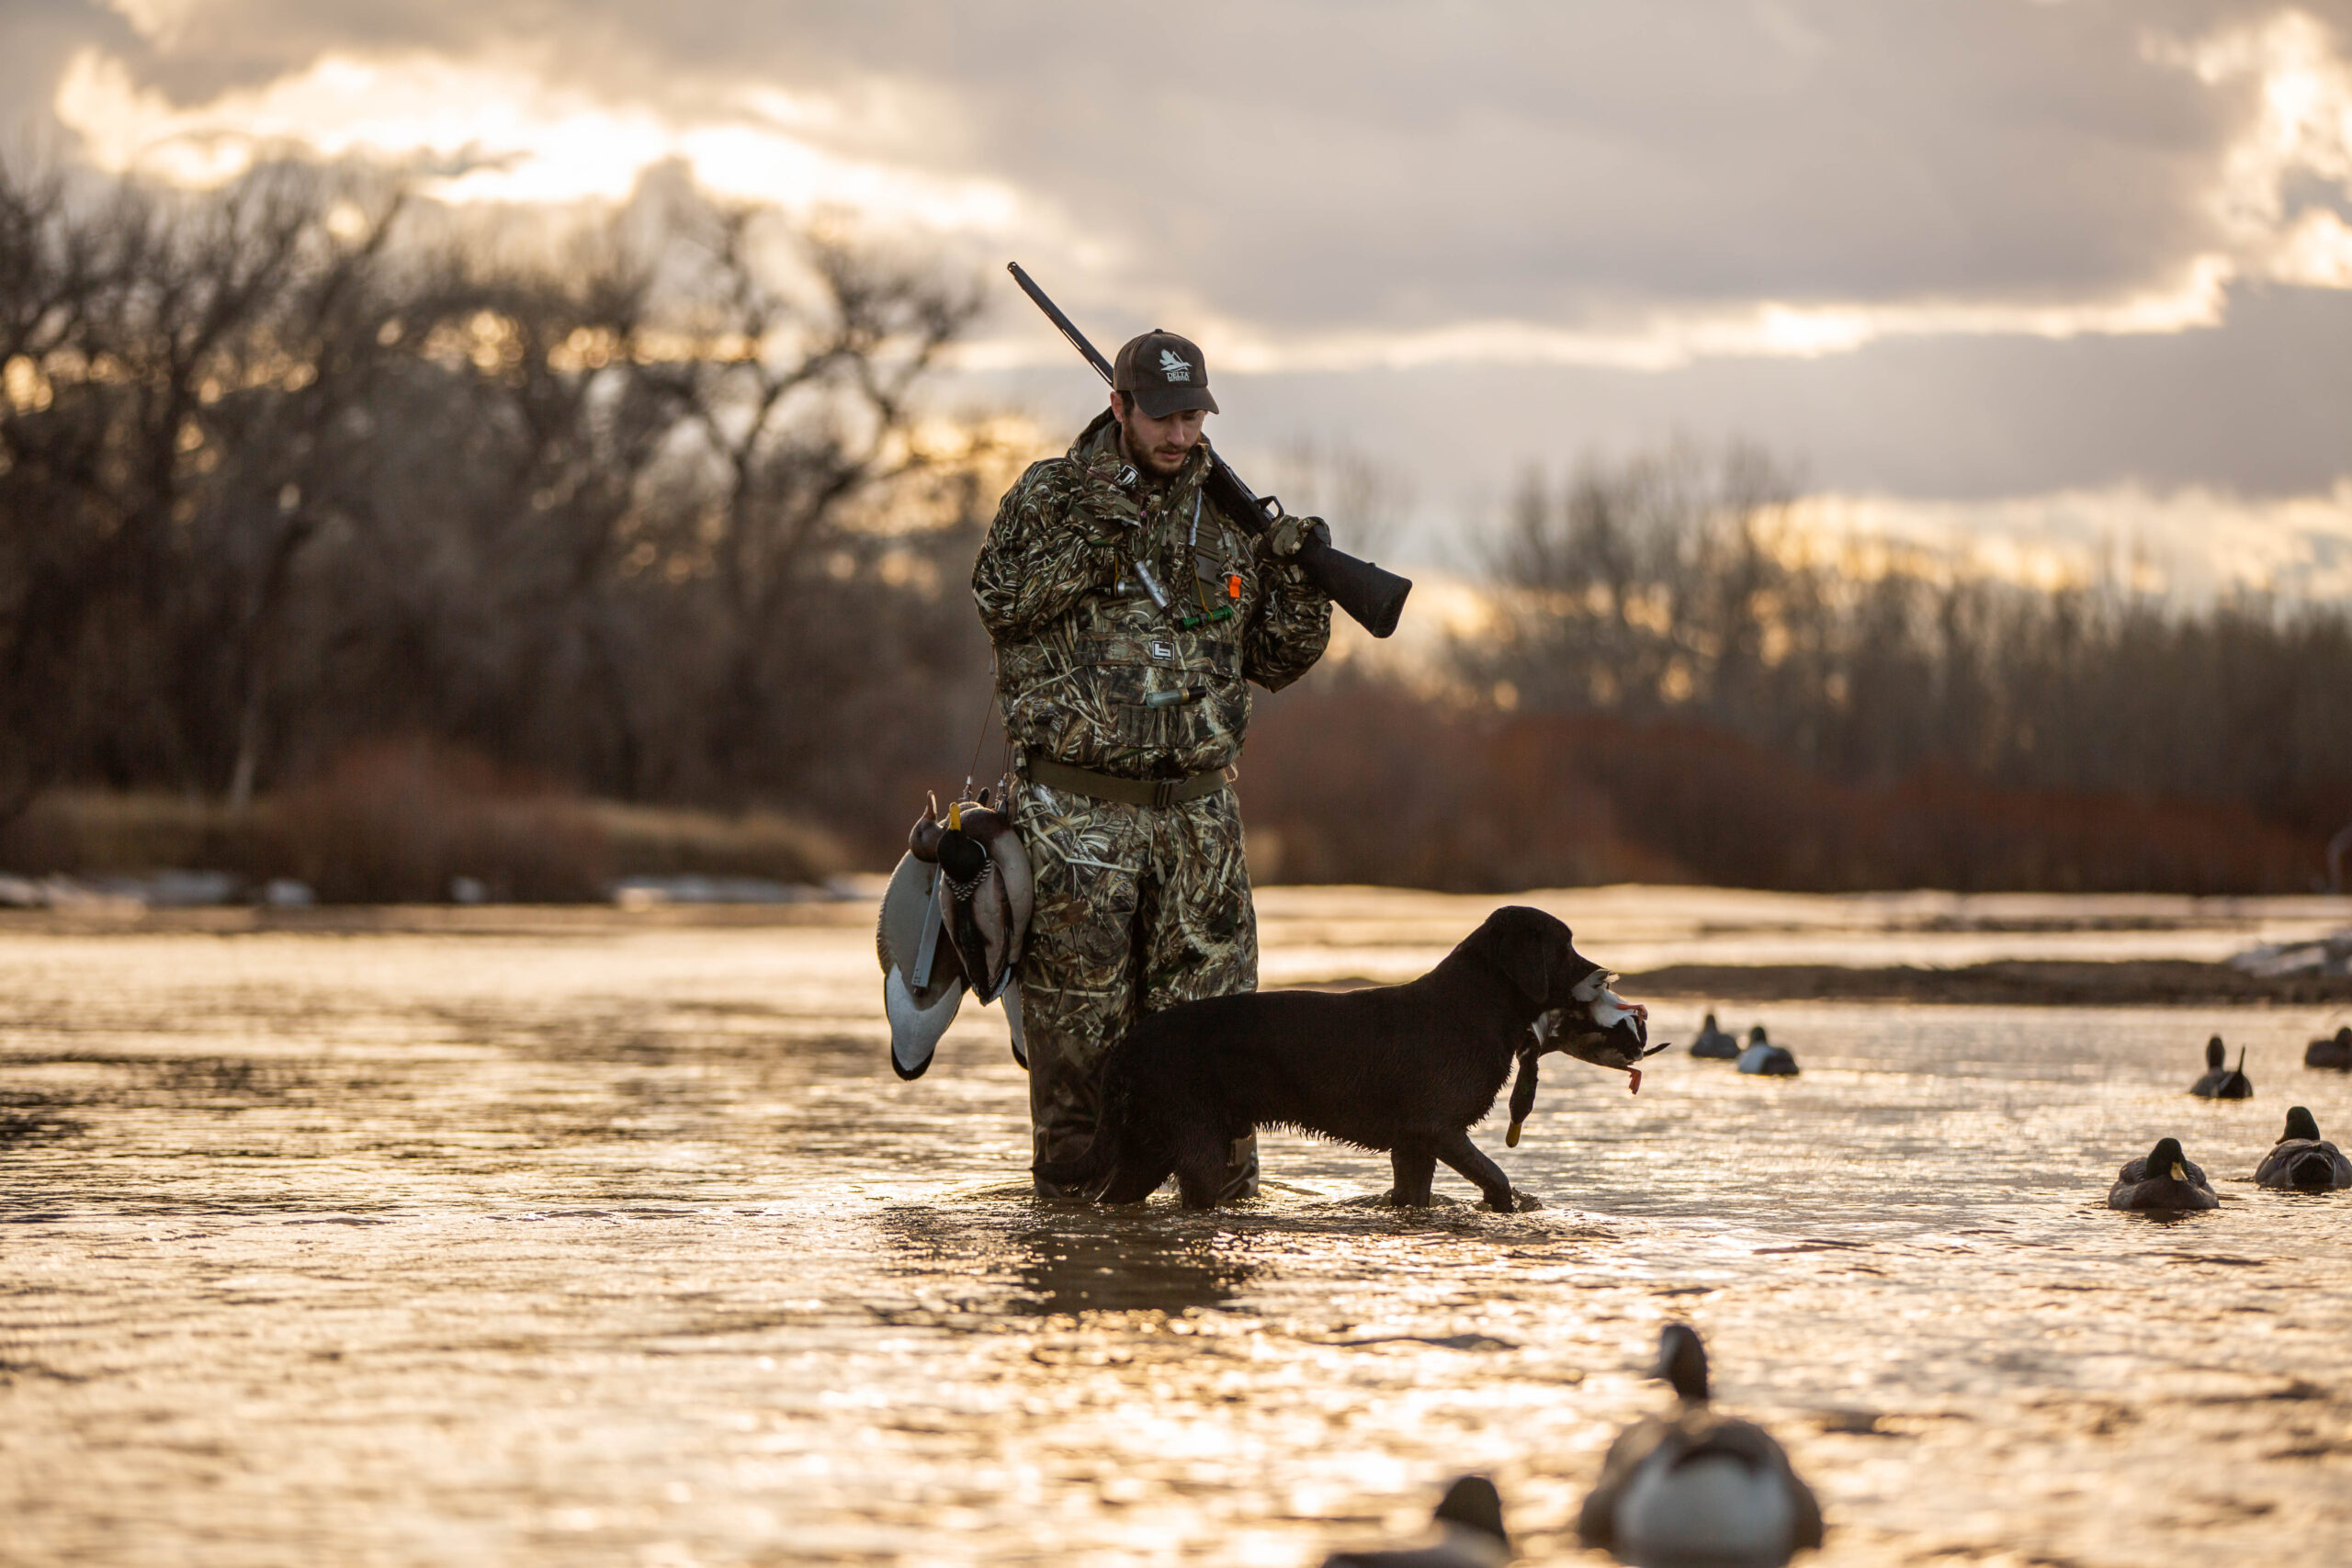 A man and his dog walk through a shimmering river on a duck hunt.